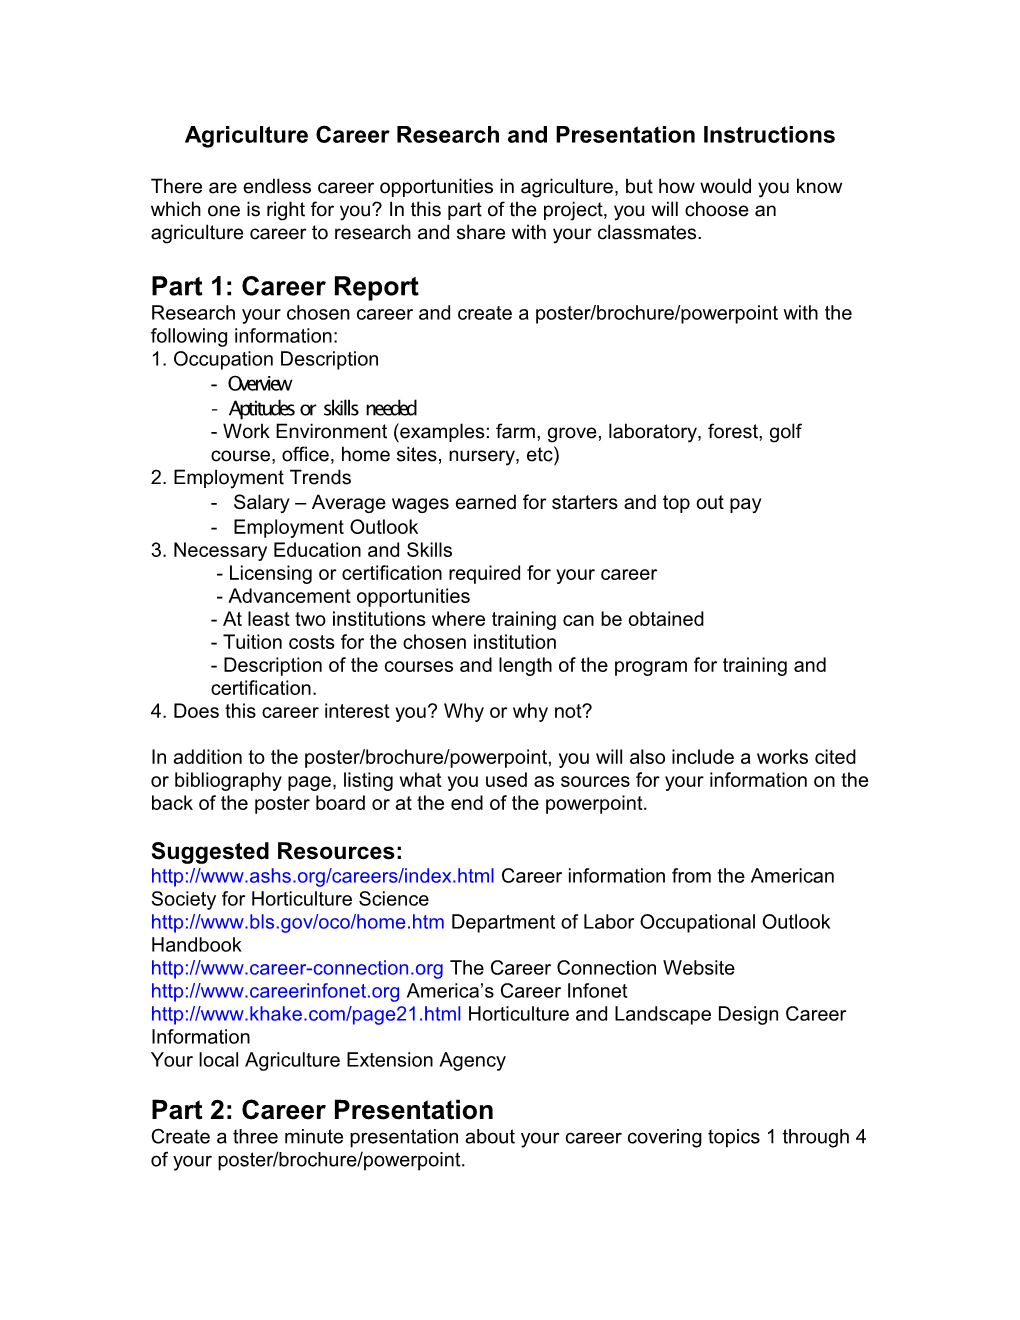 Agriculture Career Research and Presentation Instructions